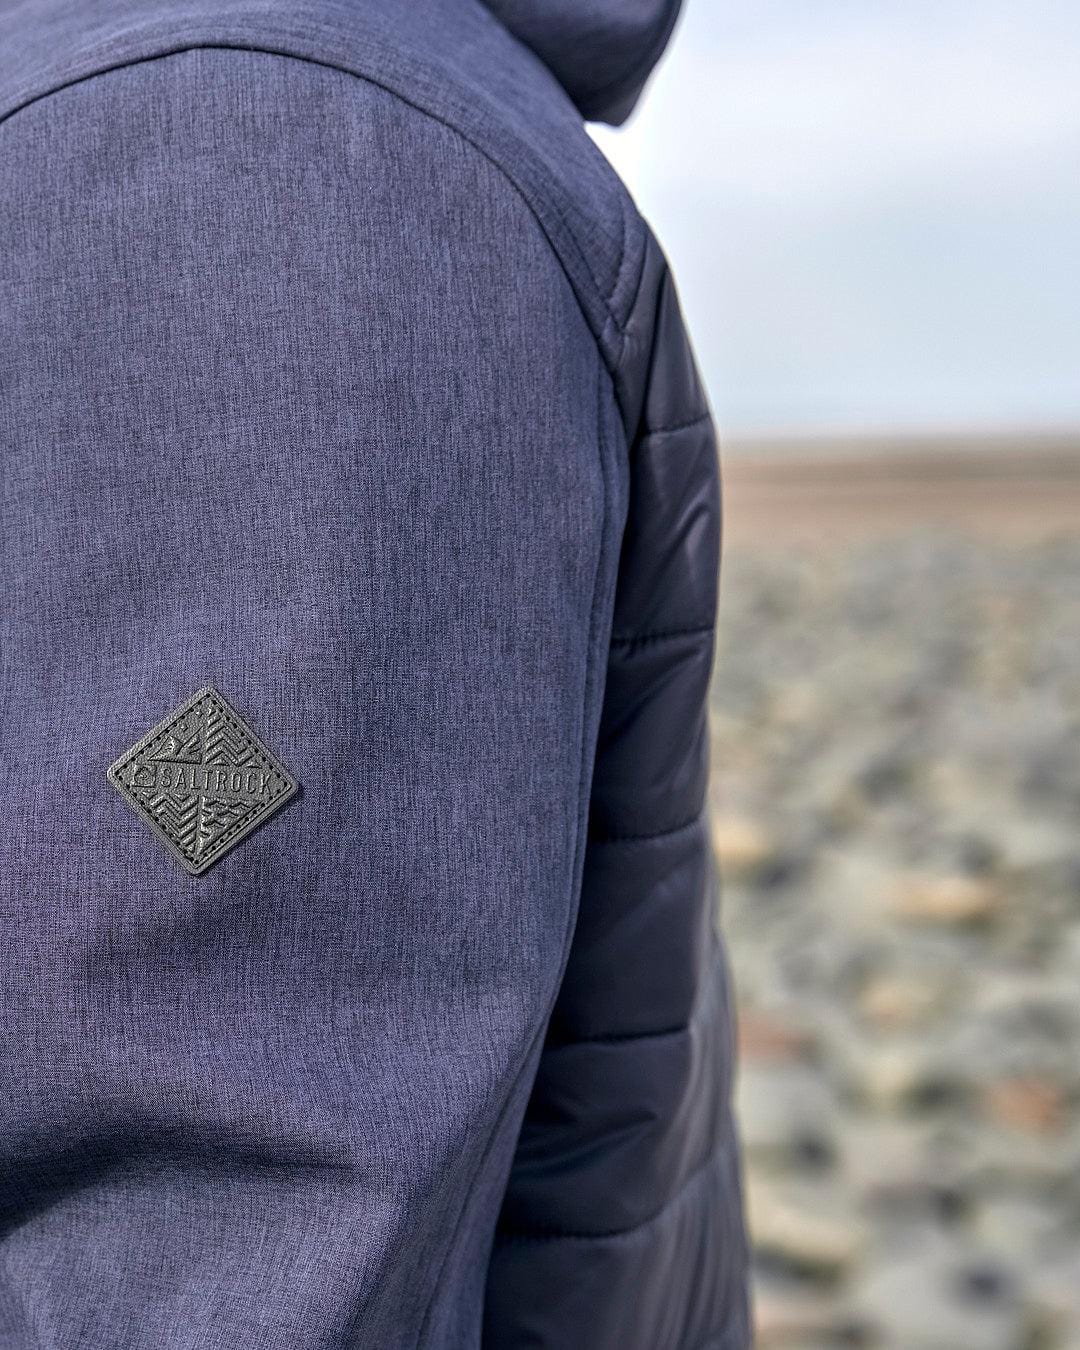 A Saltrock Purbeck Padded Jacket - Dark Blue for outdoor adventures.